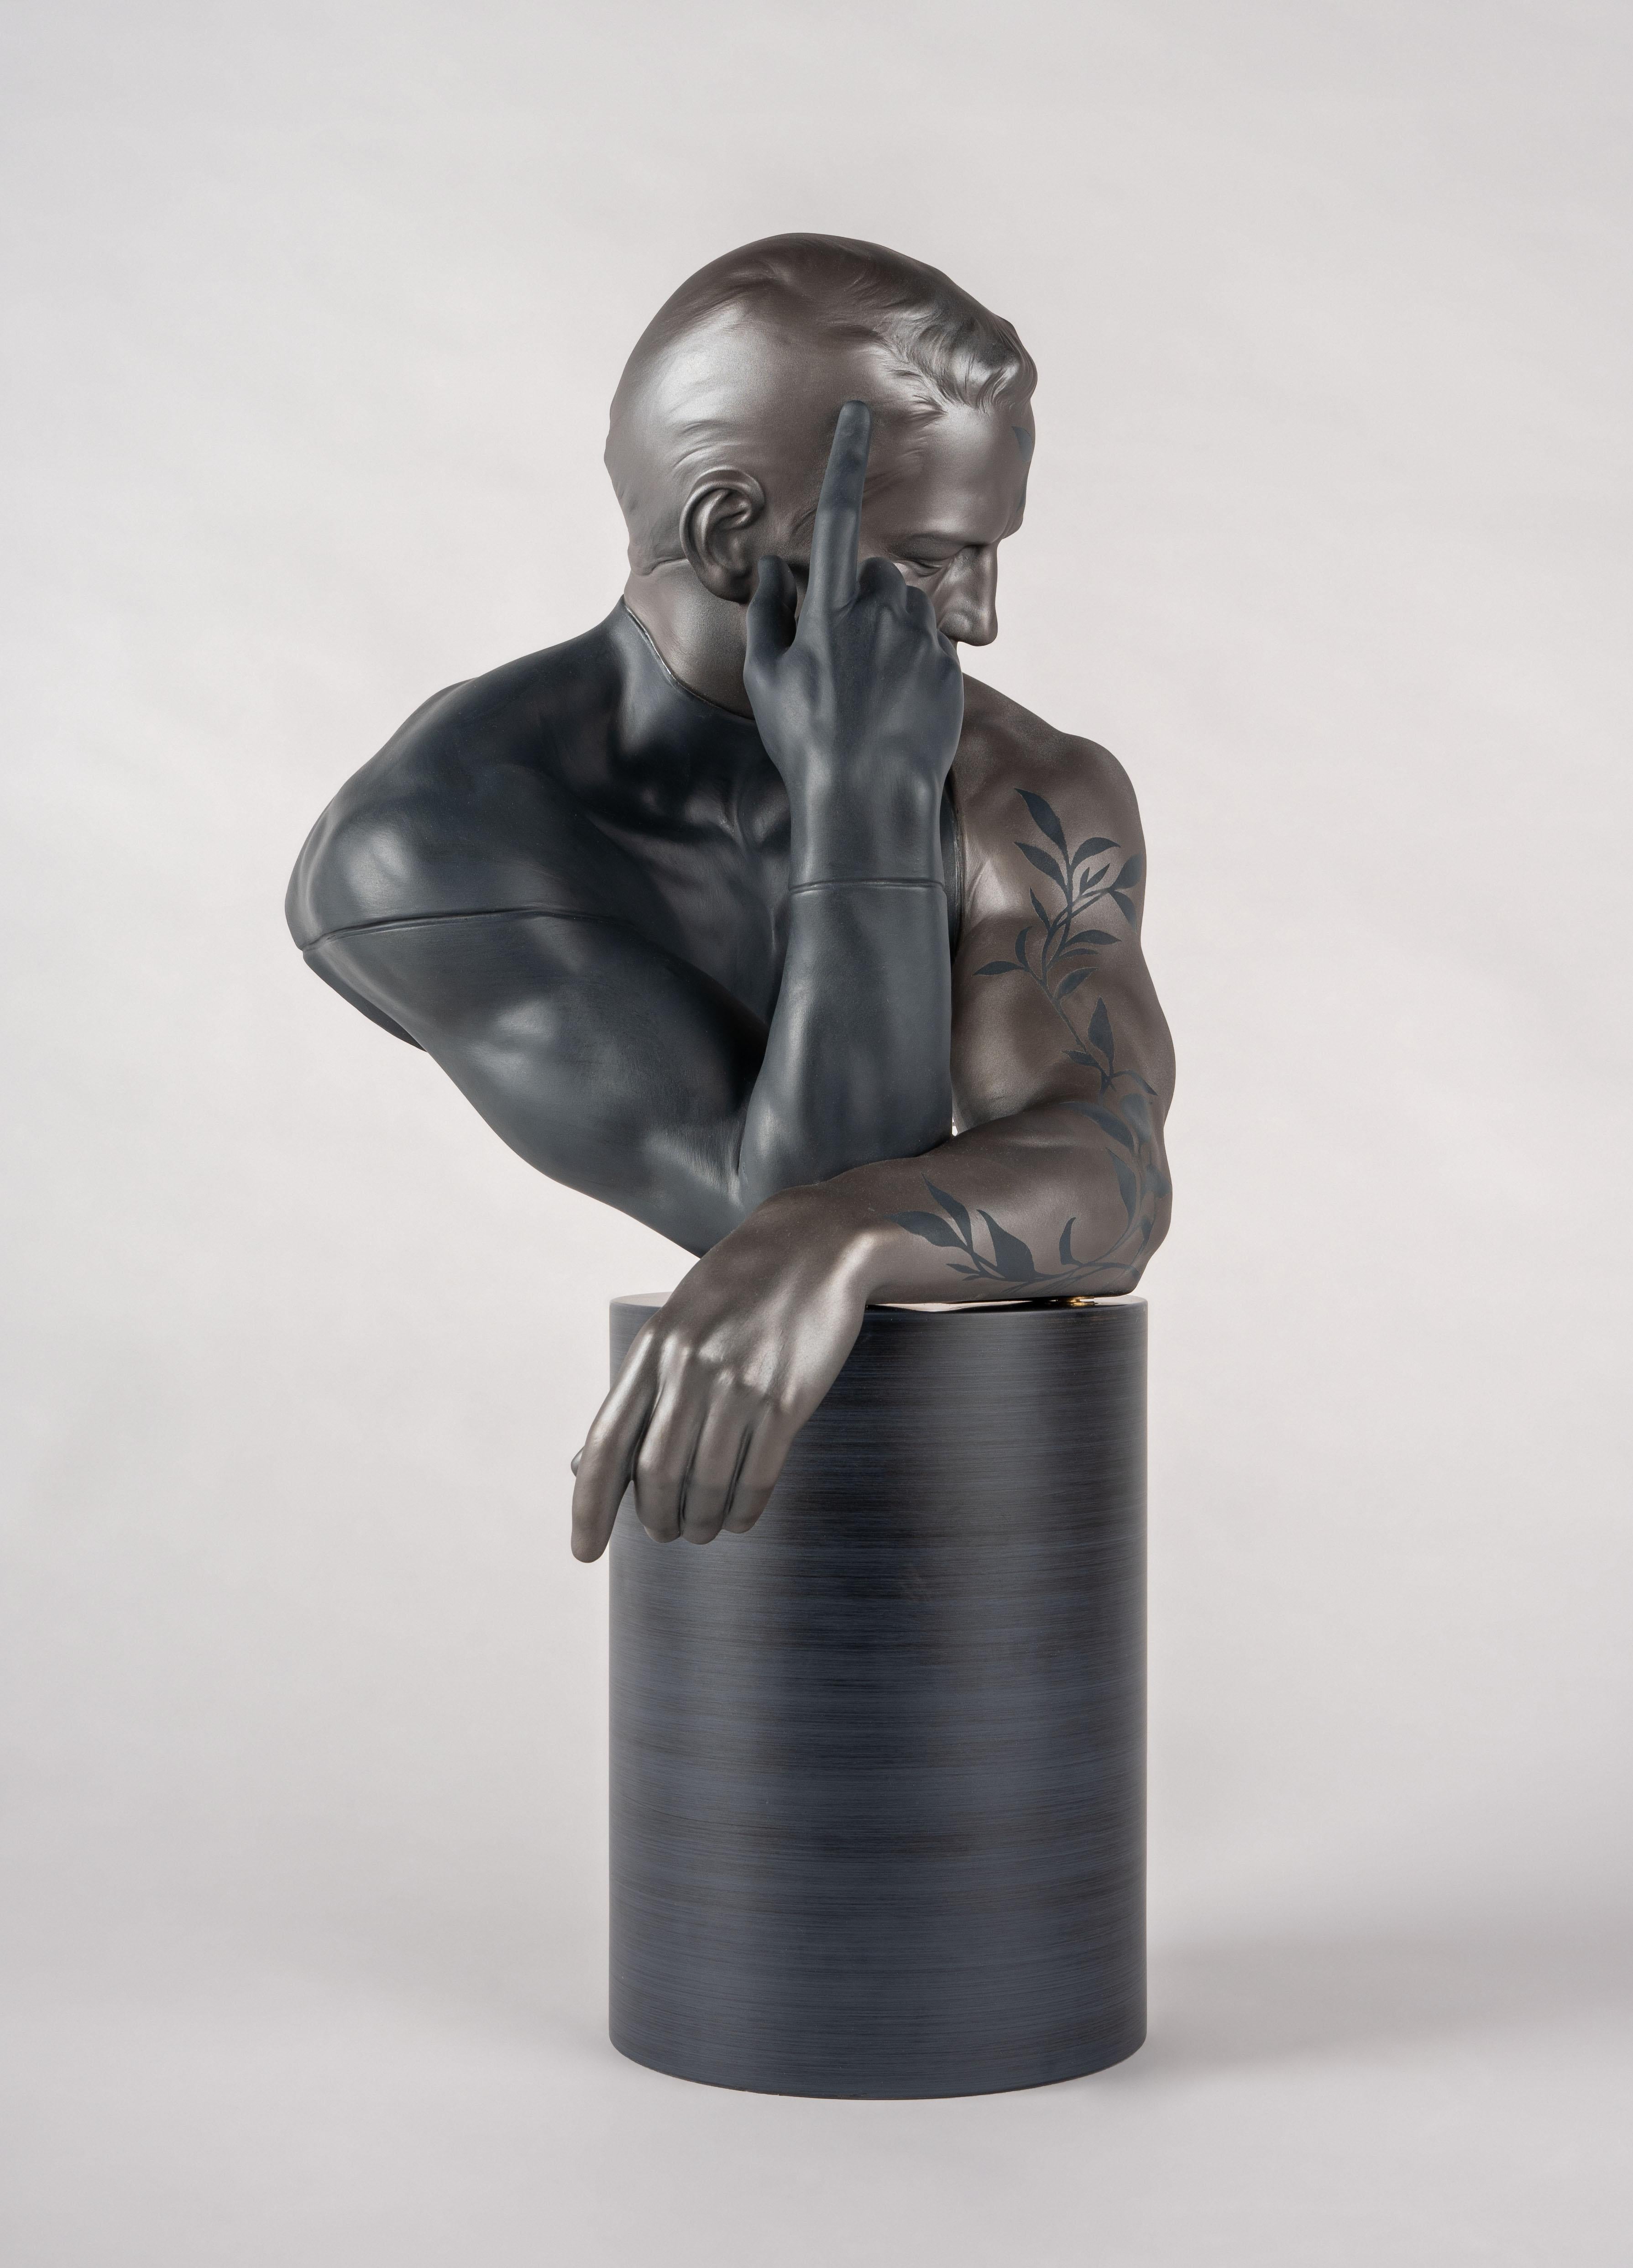 Porcelain sculpture inspired by the connection between humans and nature. This male porcelain bust portrays a man in a pensive inner-looking pose. It reminds us of the essential bond between man and nature, our responsibility for looking after it